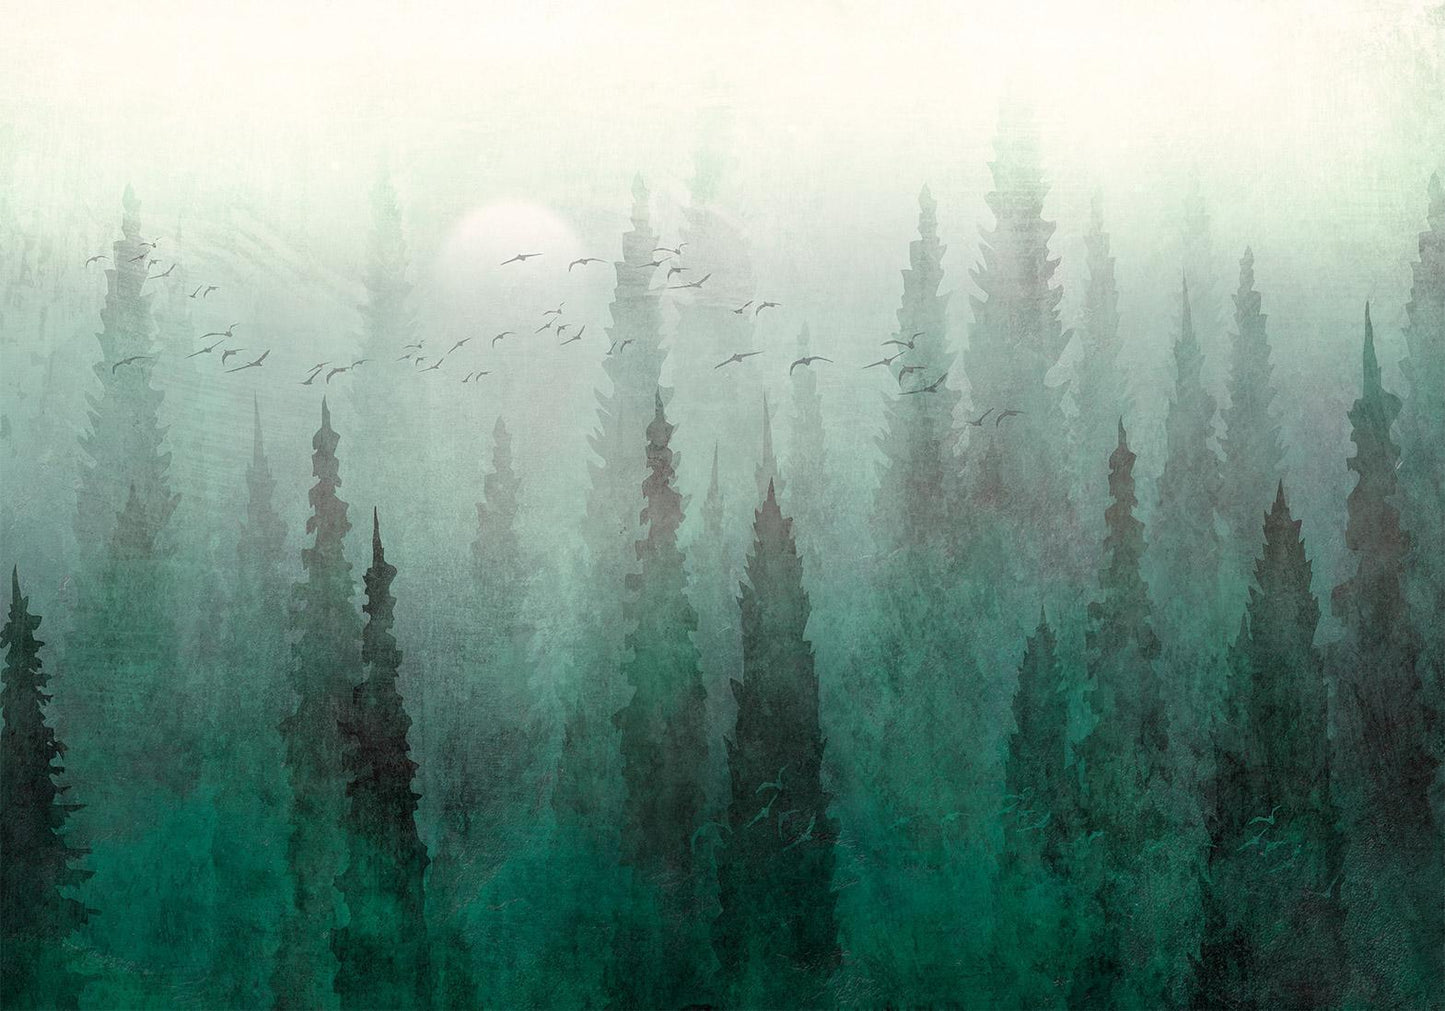 Fotobehang - Bird's eye perspective - landscape of a green forest with trees in the mist